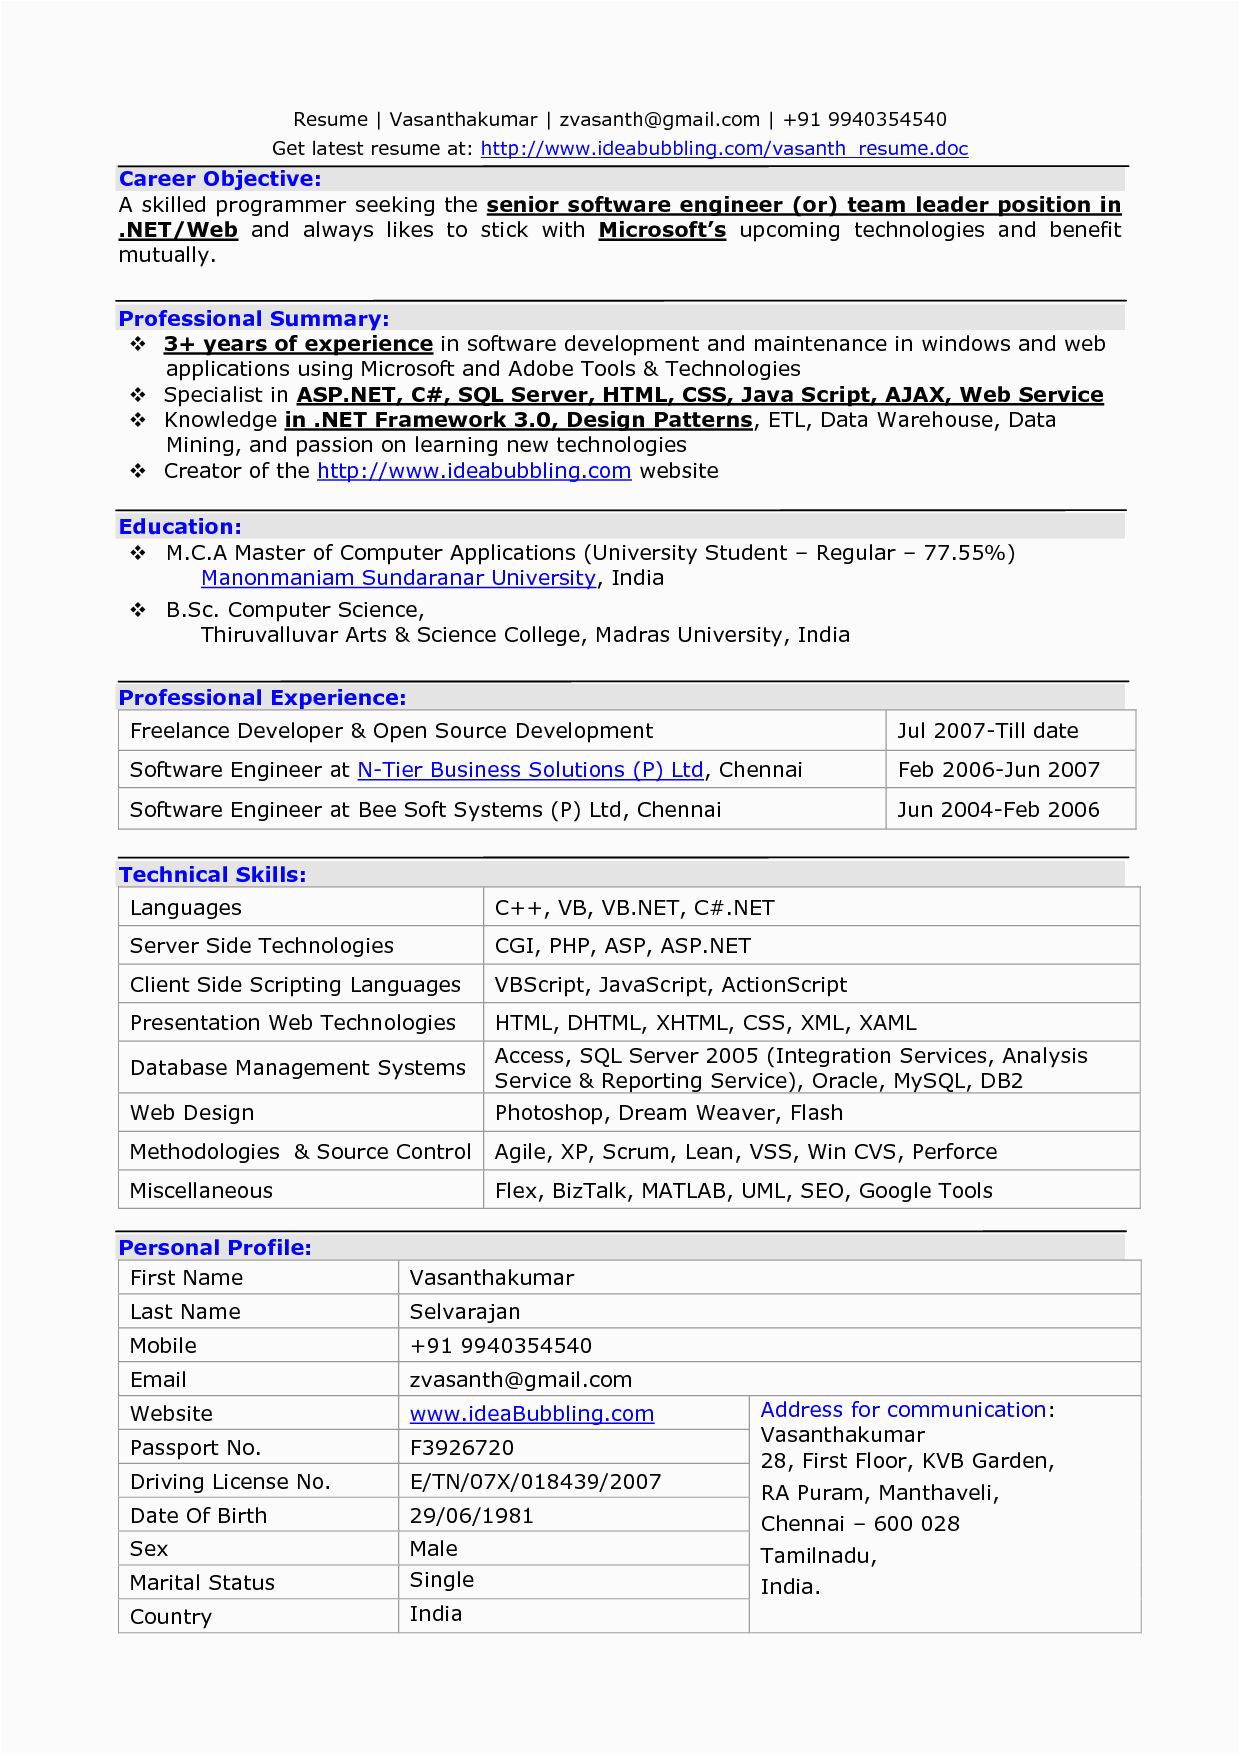 Sample Resume for One Year Experienced software Engineer Resume Experienced software Engineer